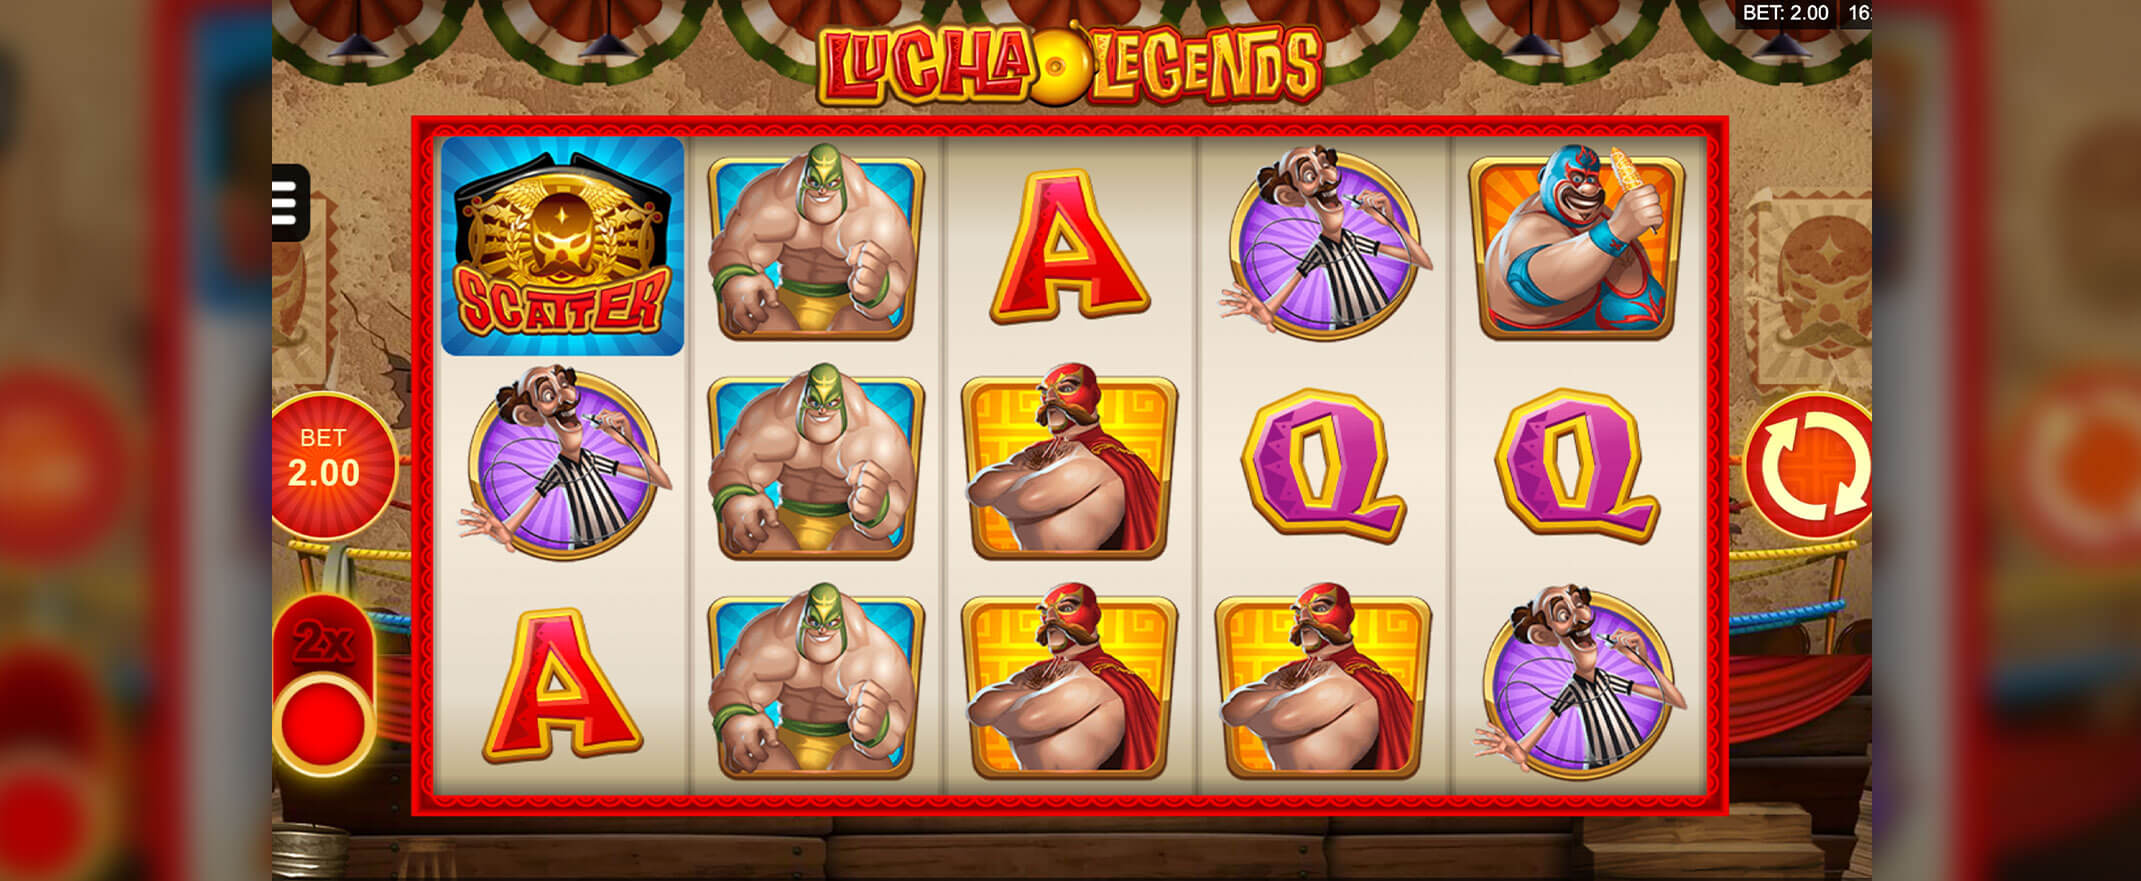 Lucha Legends by Microgaming